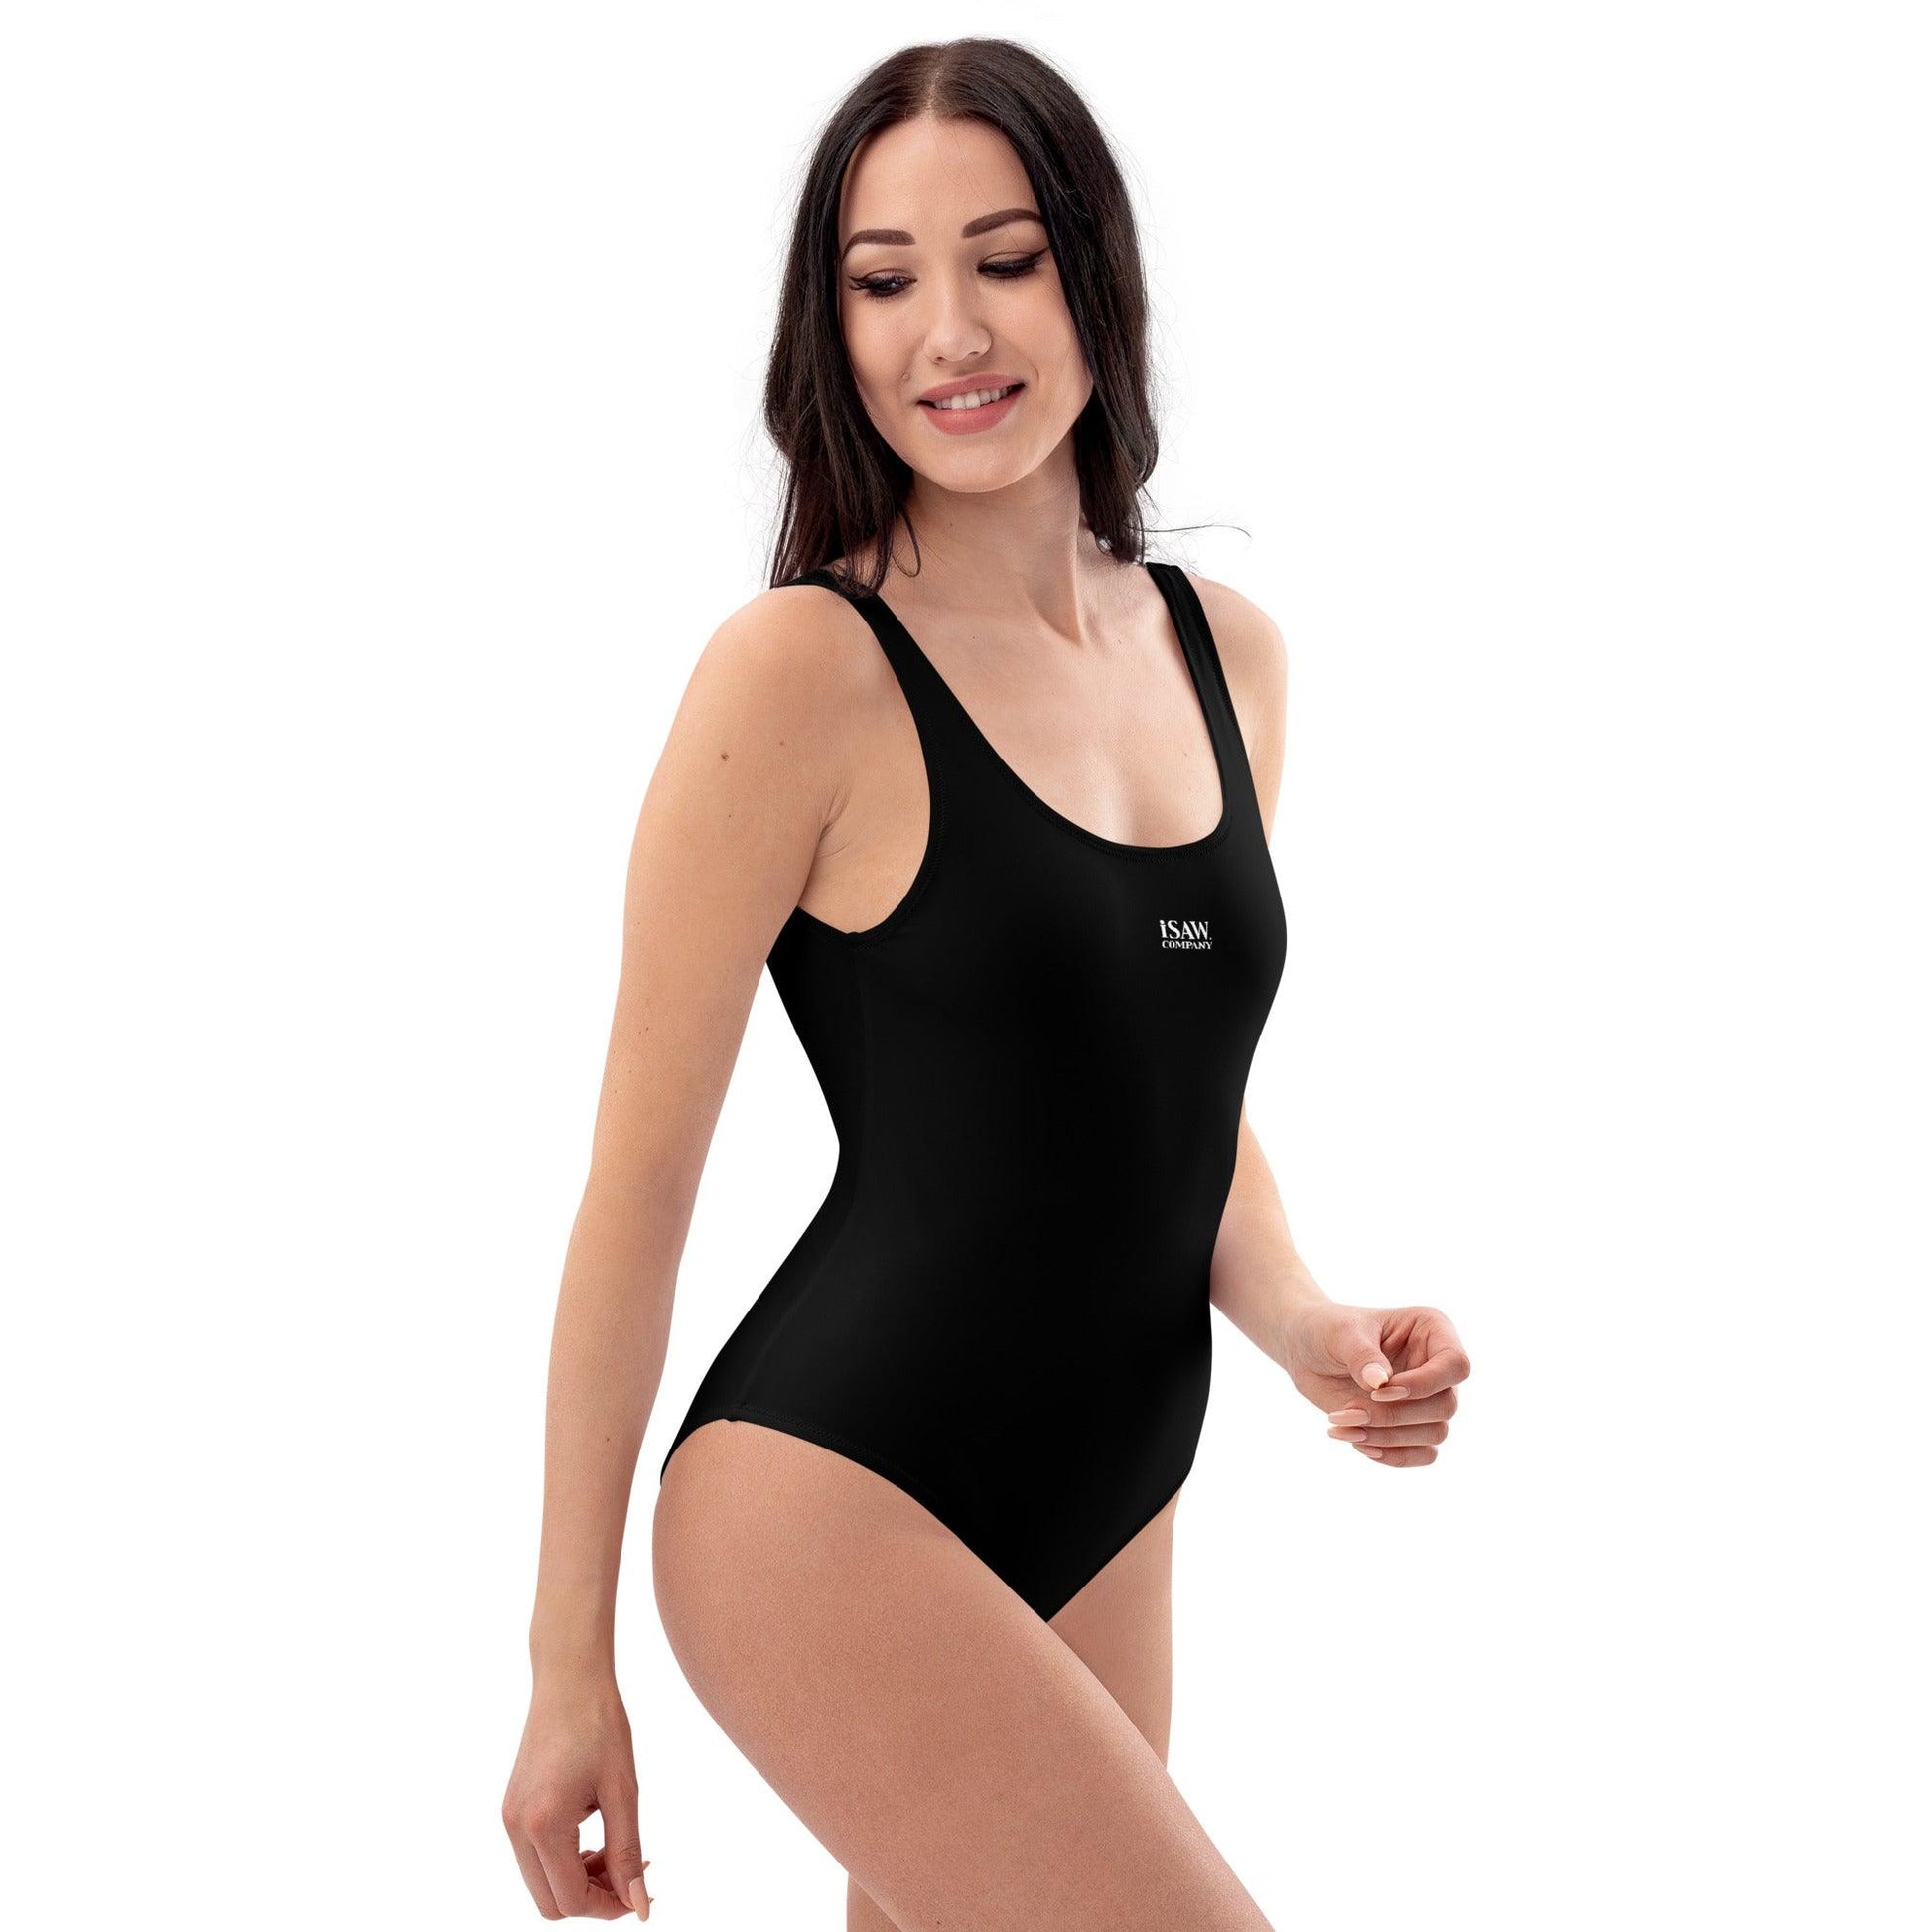 iSAW Womens Black One-Piece Swimsuit - iSAW Company